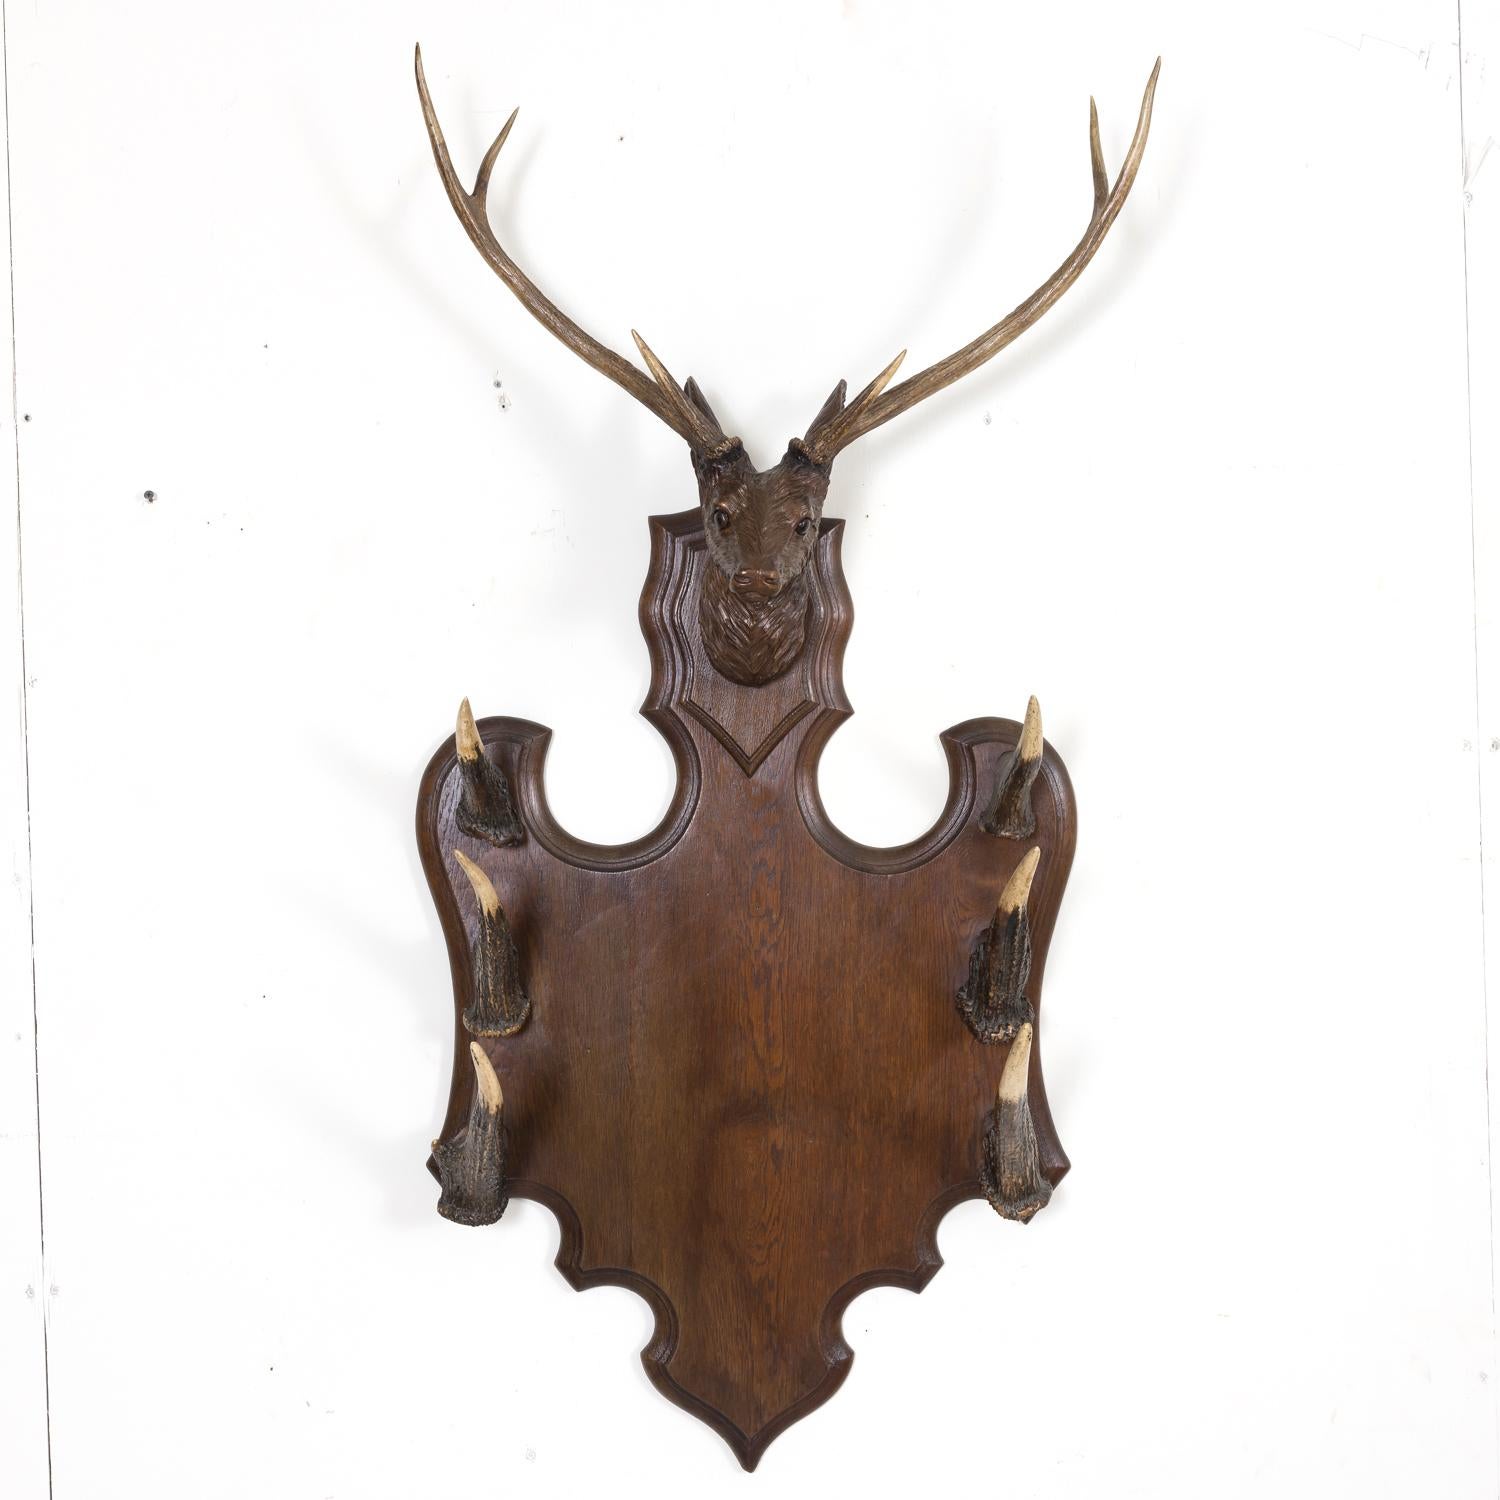 A handsome 19th century Black Forest gun rack hand carved of solid oak in the French Alps, circa 1890s. This unique rack features an intricately carved stag head having glass eyes and mounted antlers with three rows of horns mounted on each side of